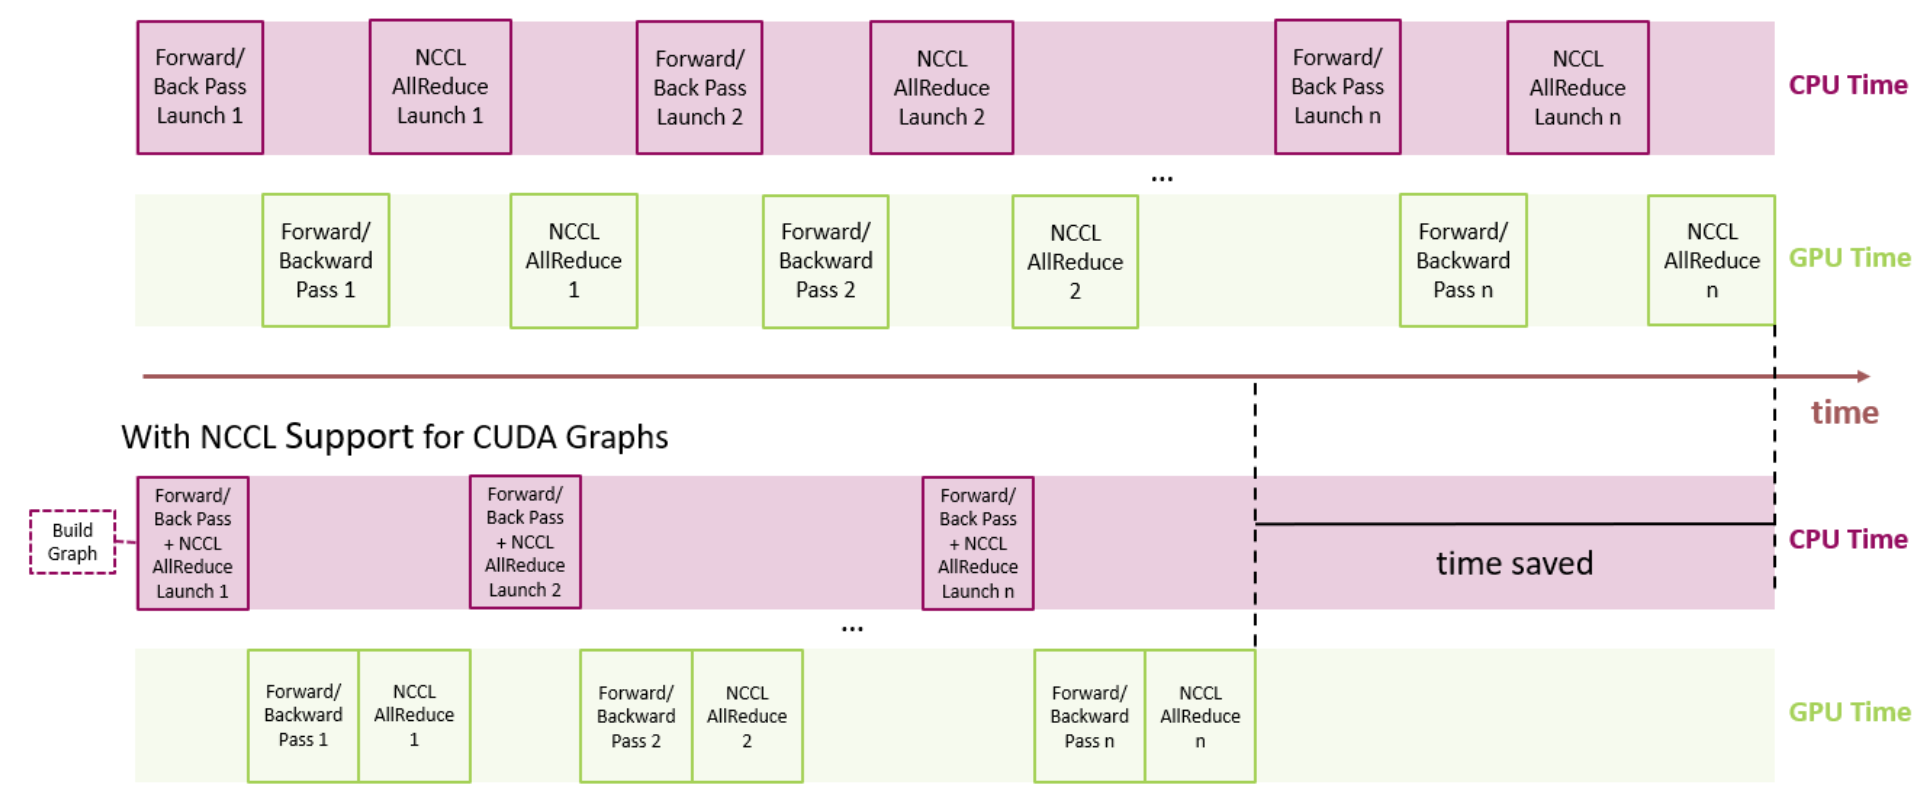 With NCCL CUDA graph support, all the kernel launches for NCCL AllReduce for  the forward/backward propagation can be bundled into a graph to reduce overhead launch time.